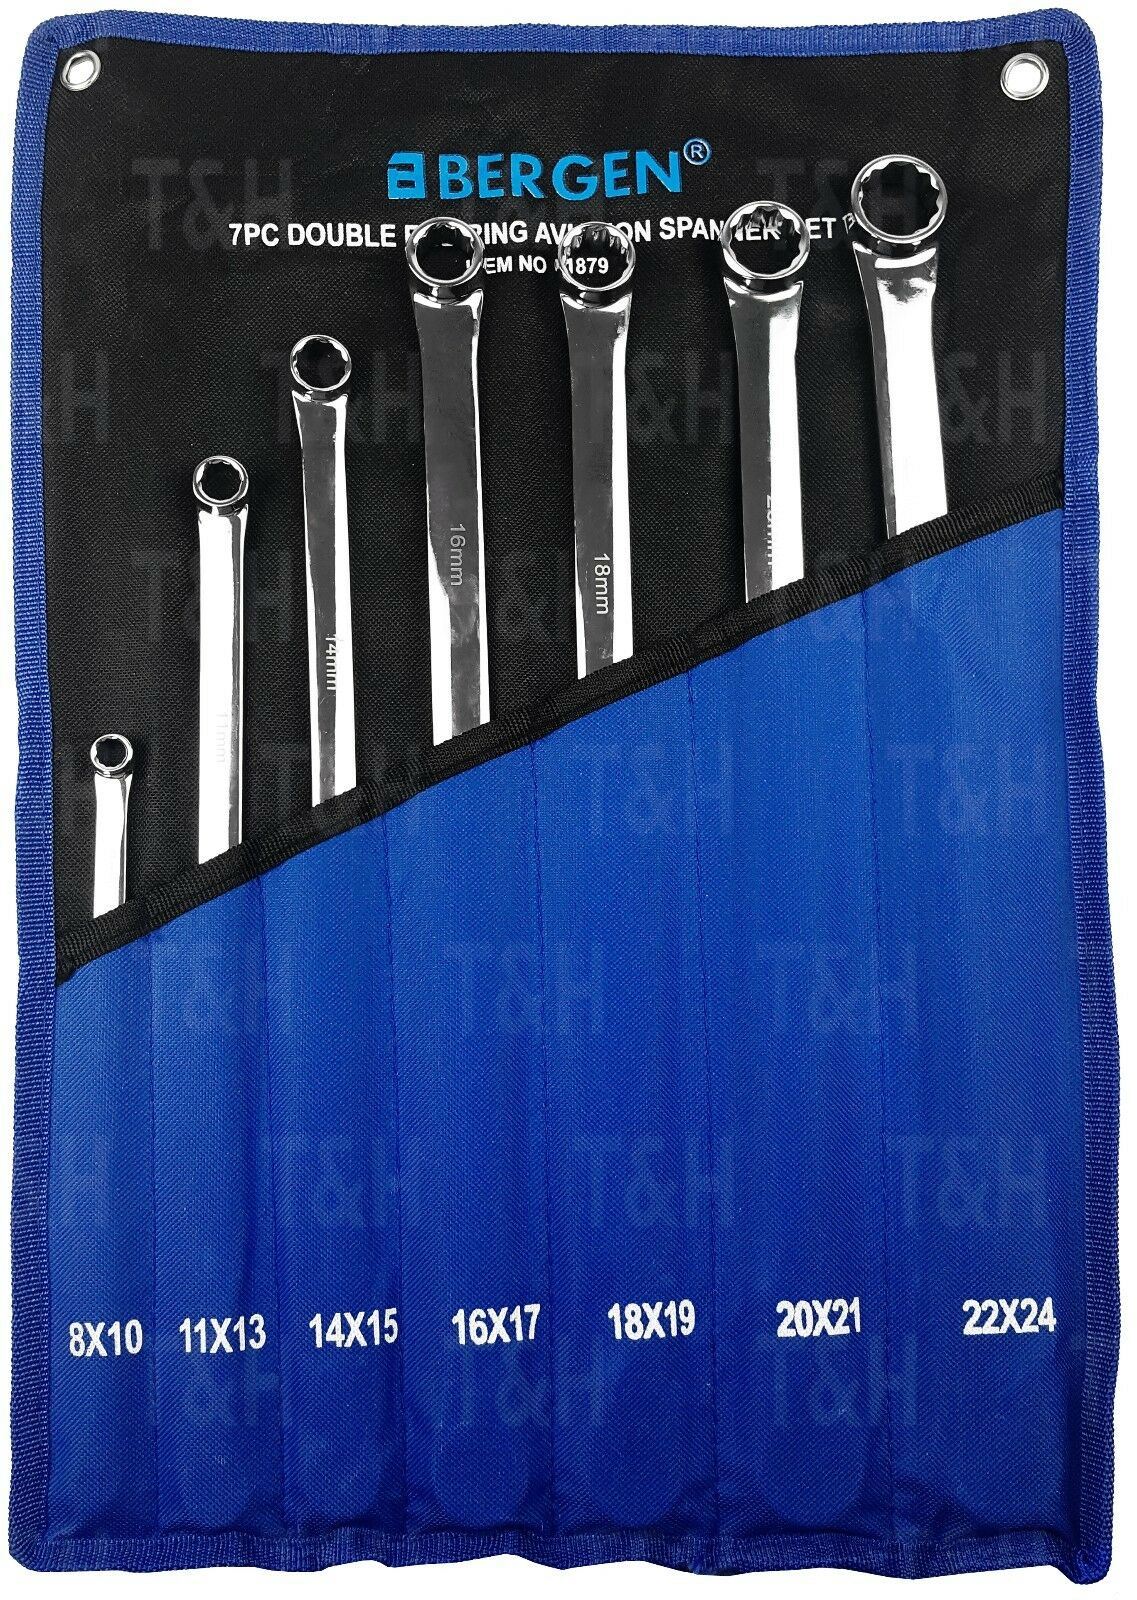 US PRO 7PCS EXTRA LONG AVIATION SPANNERS 8MM - 24MM